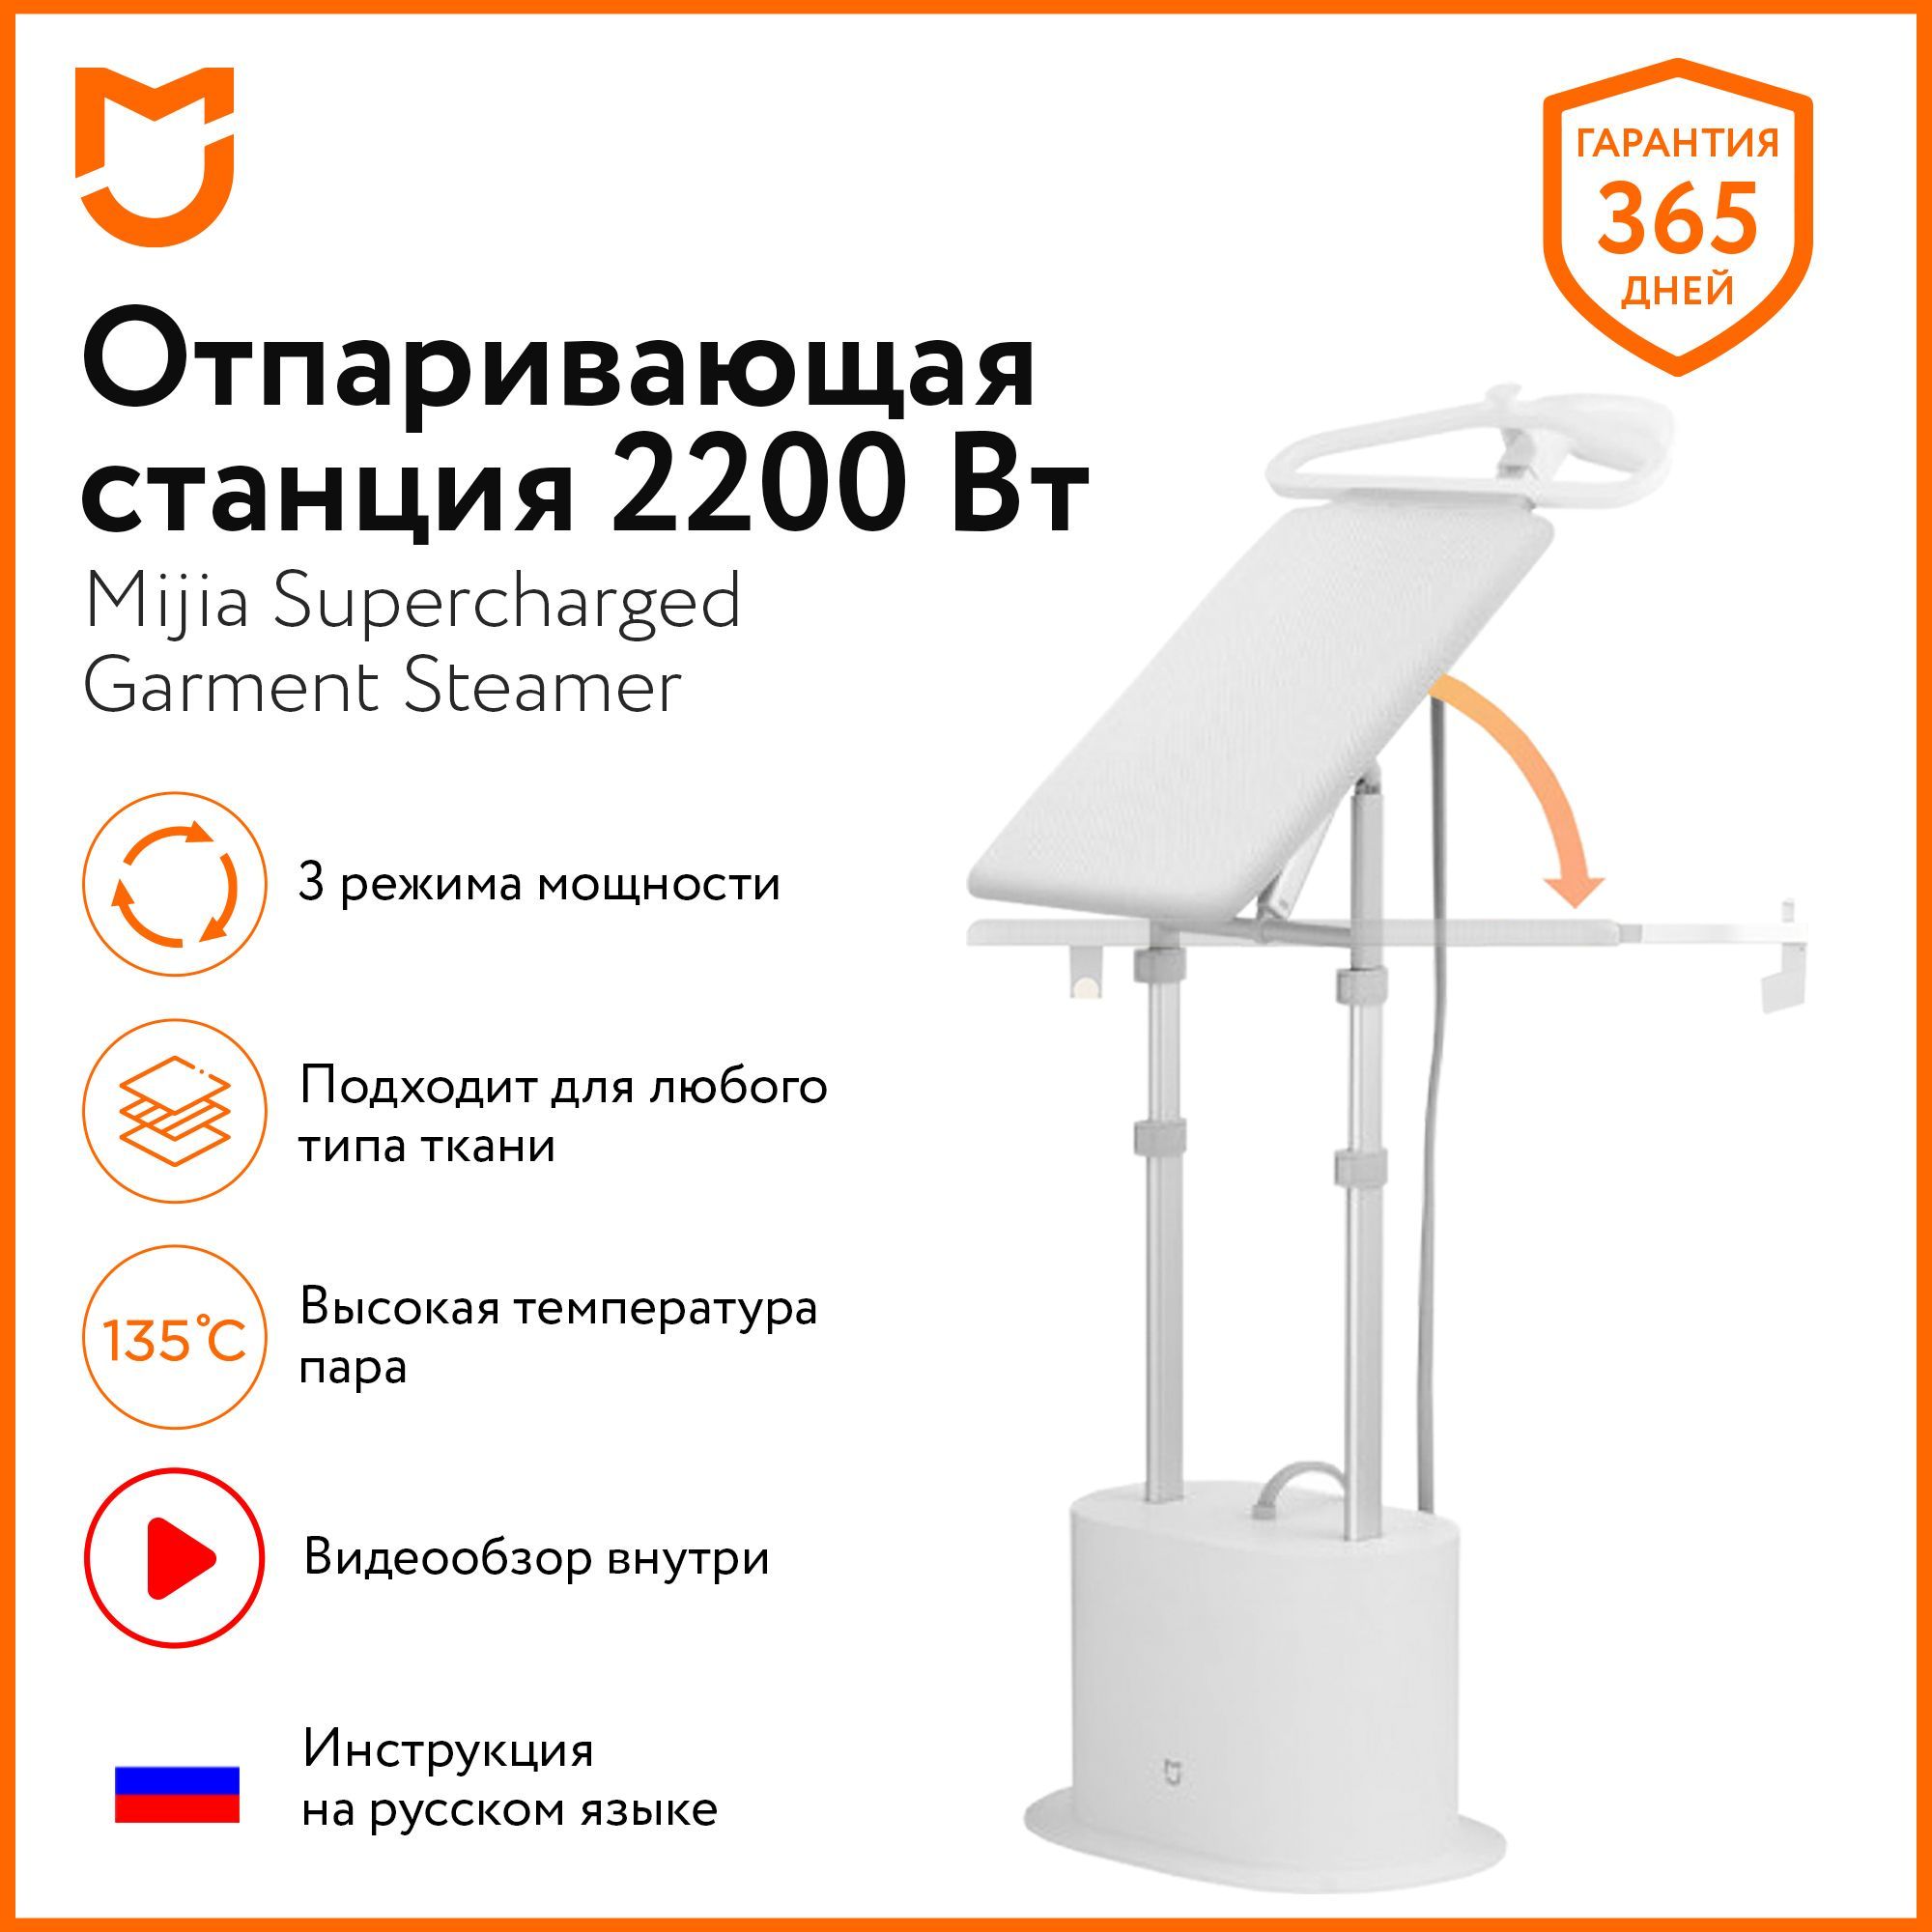 Mijia supercharged steam garment steamer фото 2